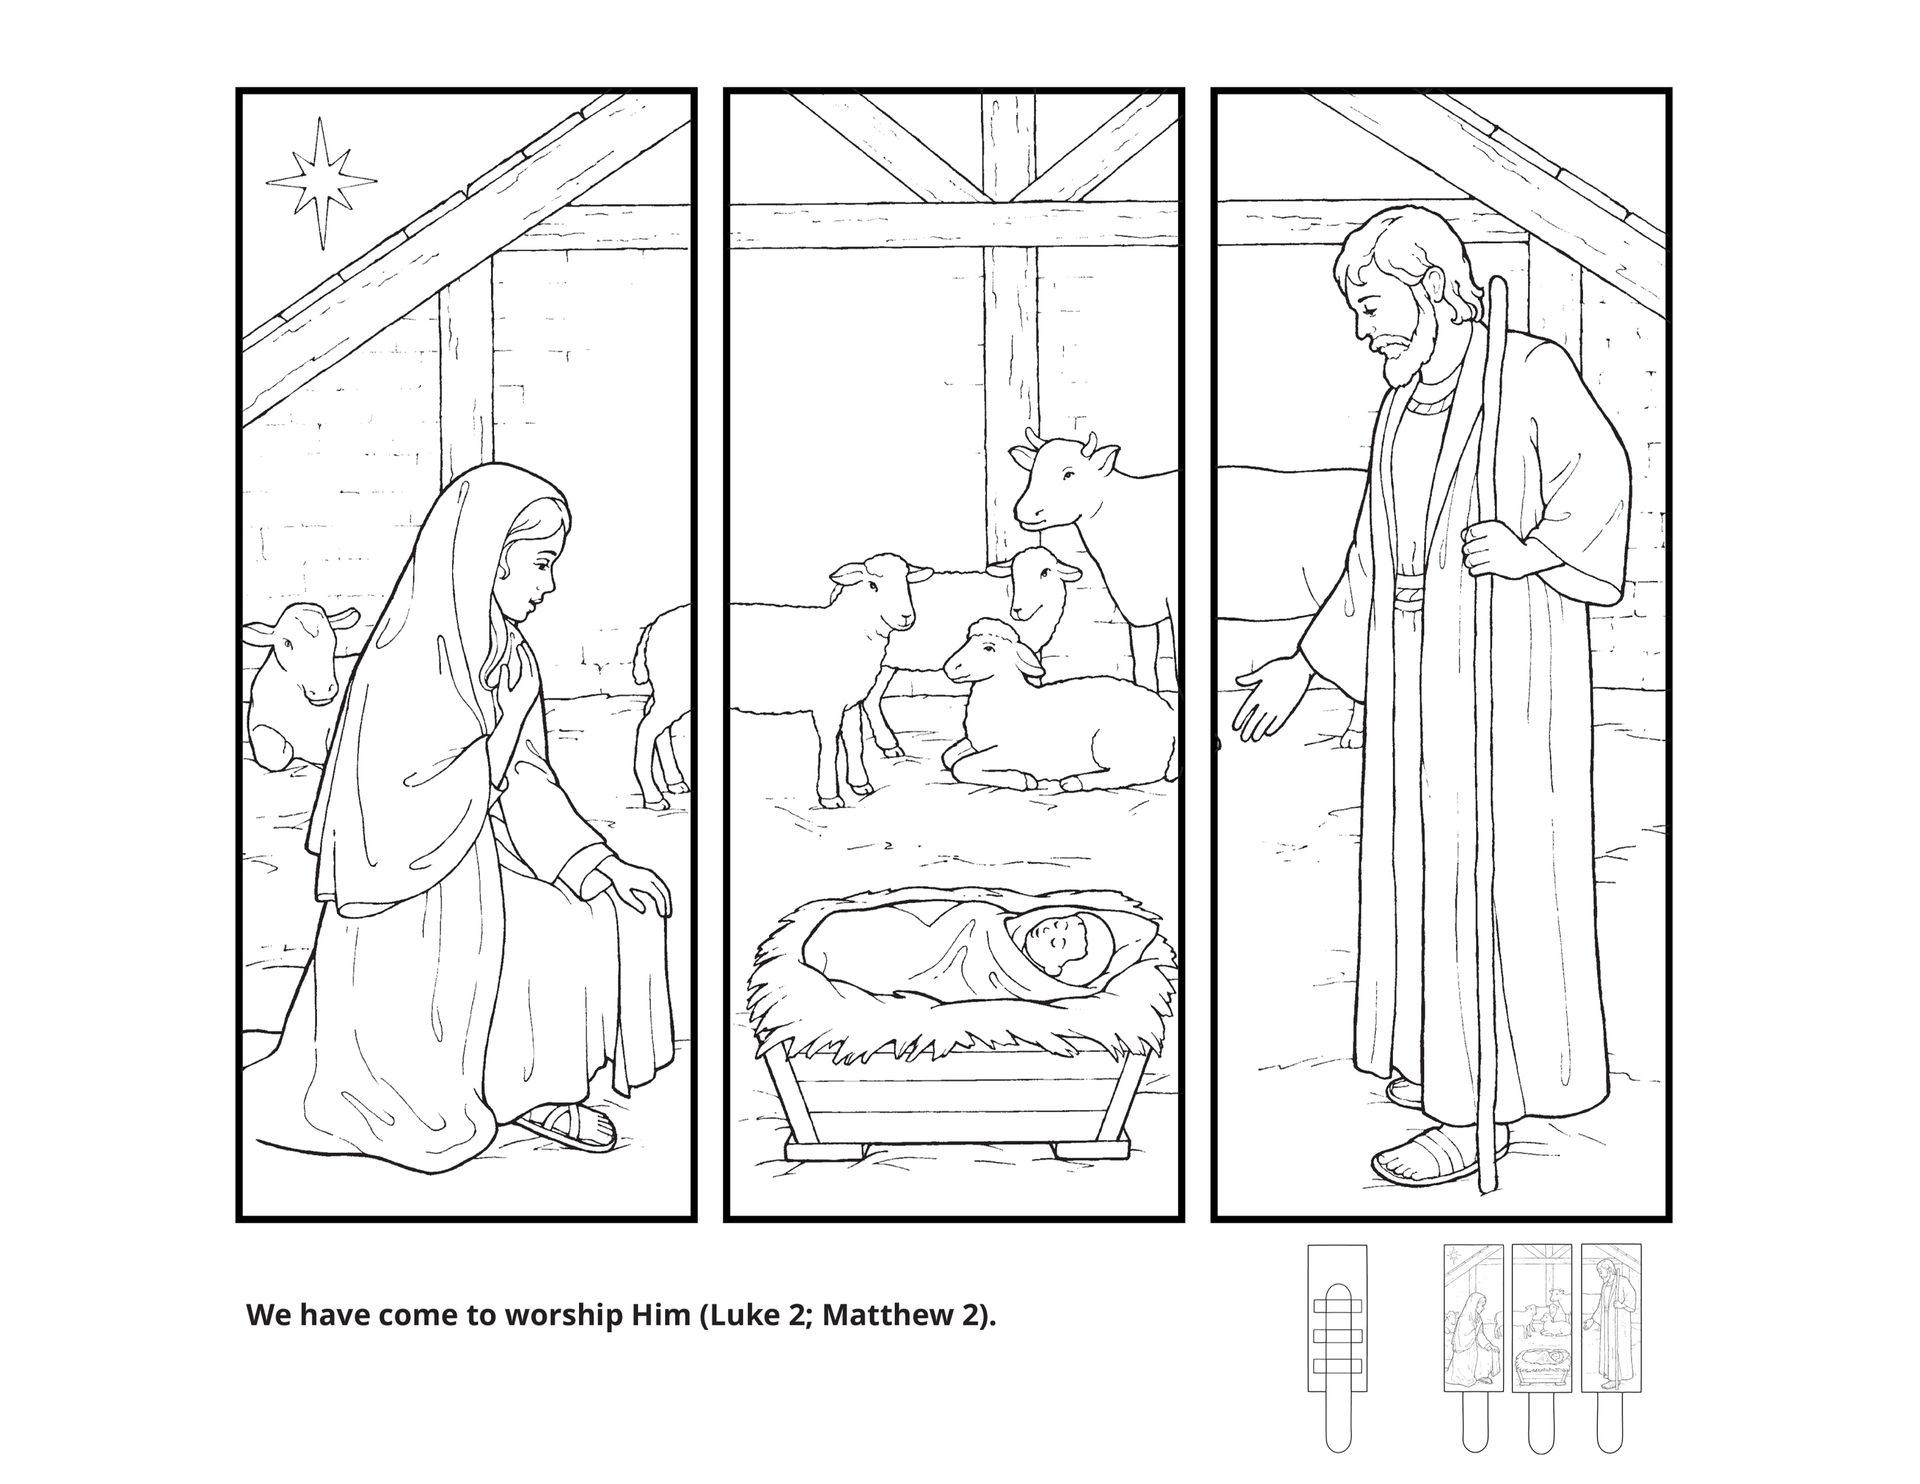 “We have come to worship Him (Luke 2; Matthew 2).” An illustration of the Nativity.